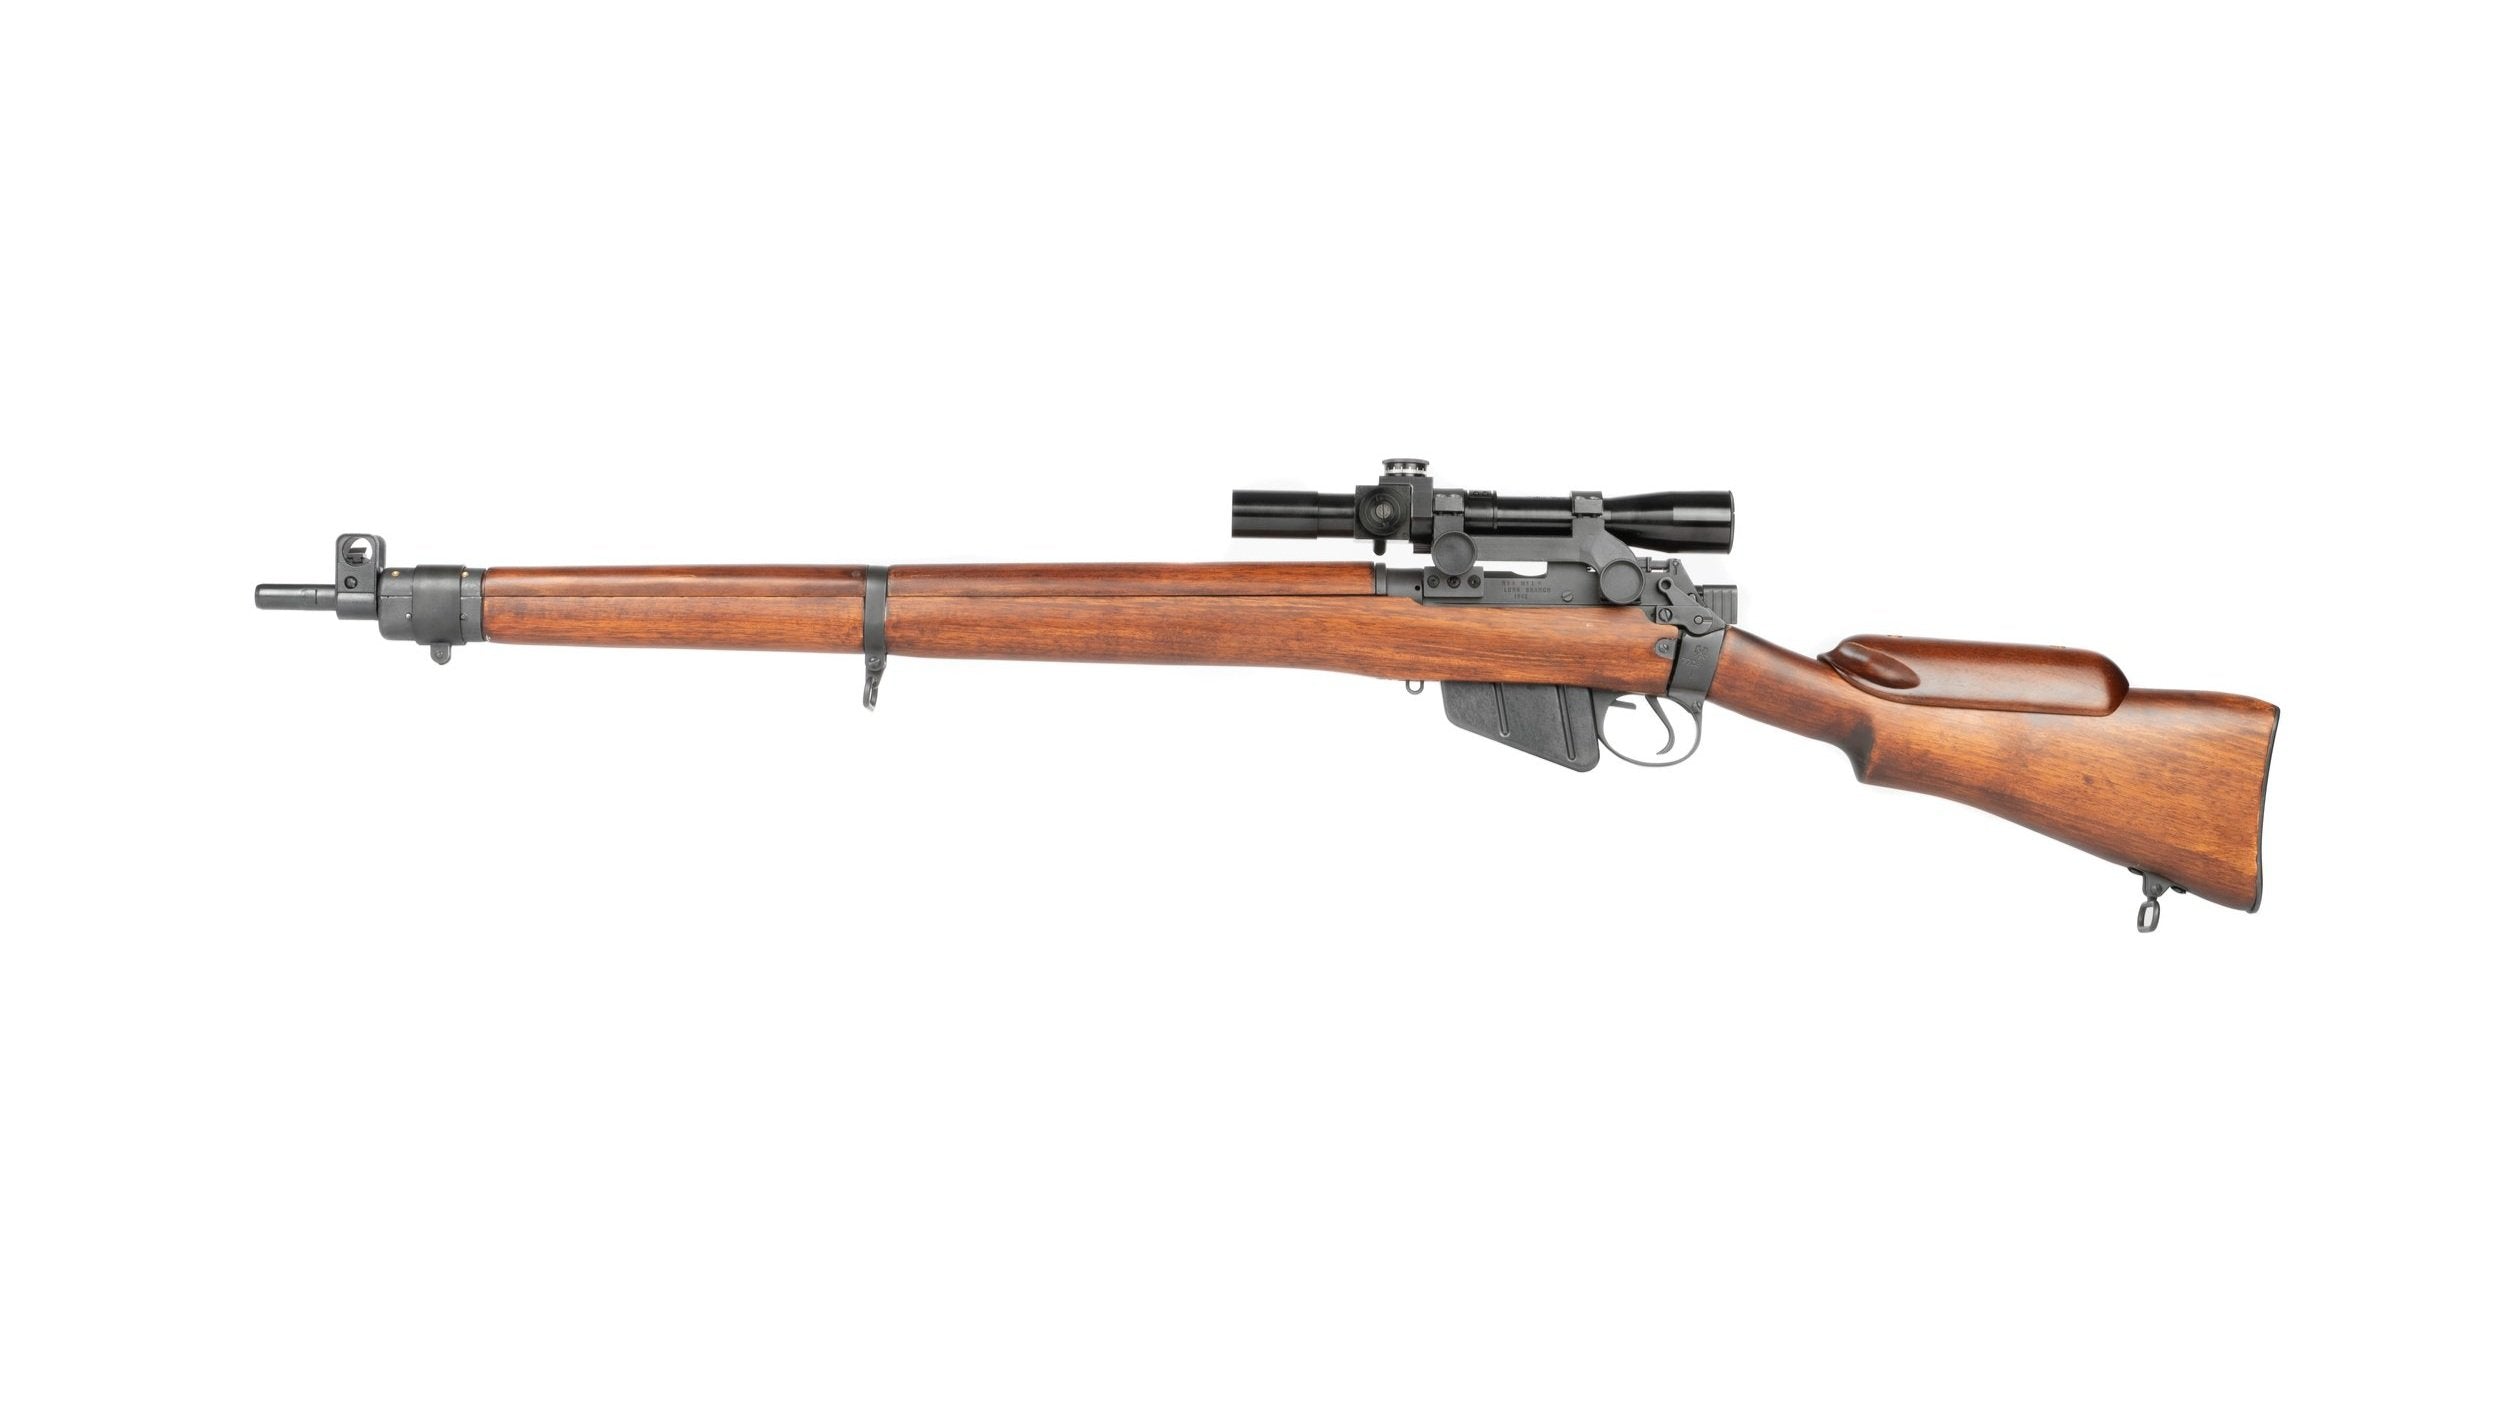 Ares SMLE British No.4 MK1 (Lee Enfield) (No Scope / Scoped)